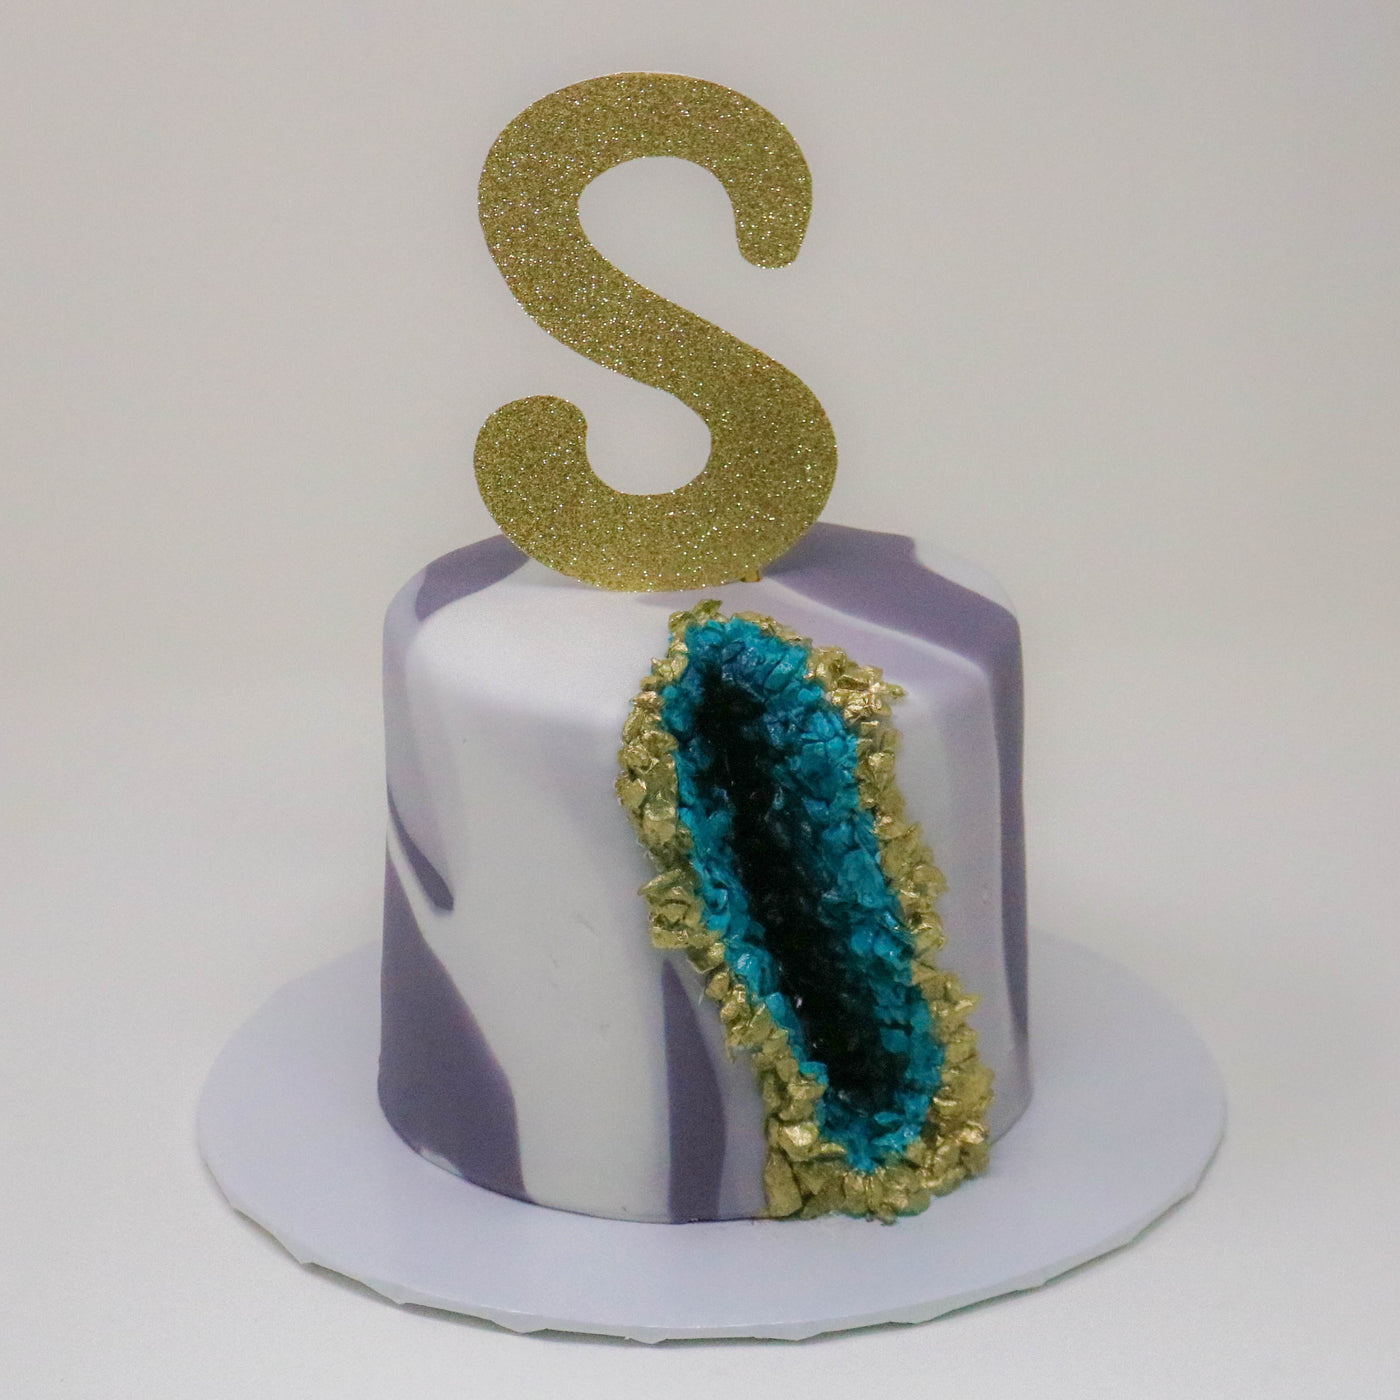 Geode Cake - Emerald and Gold